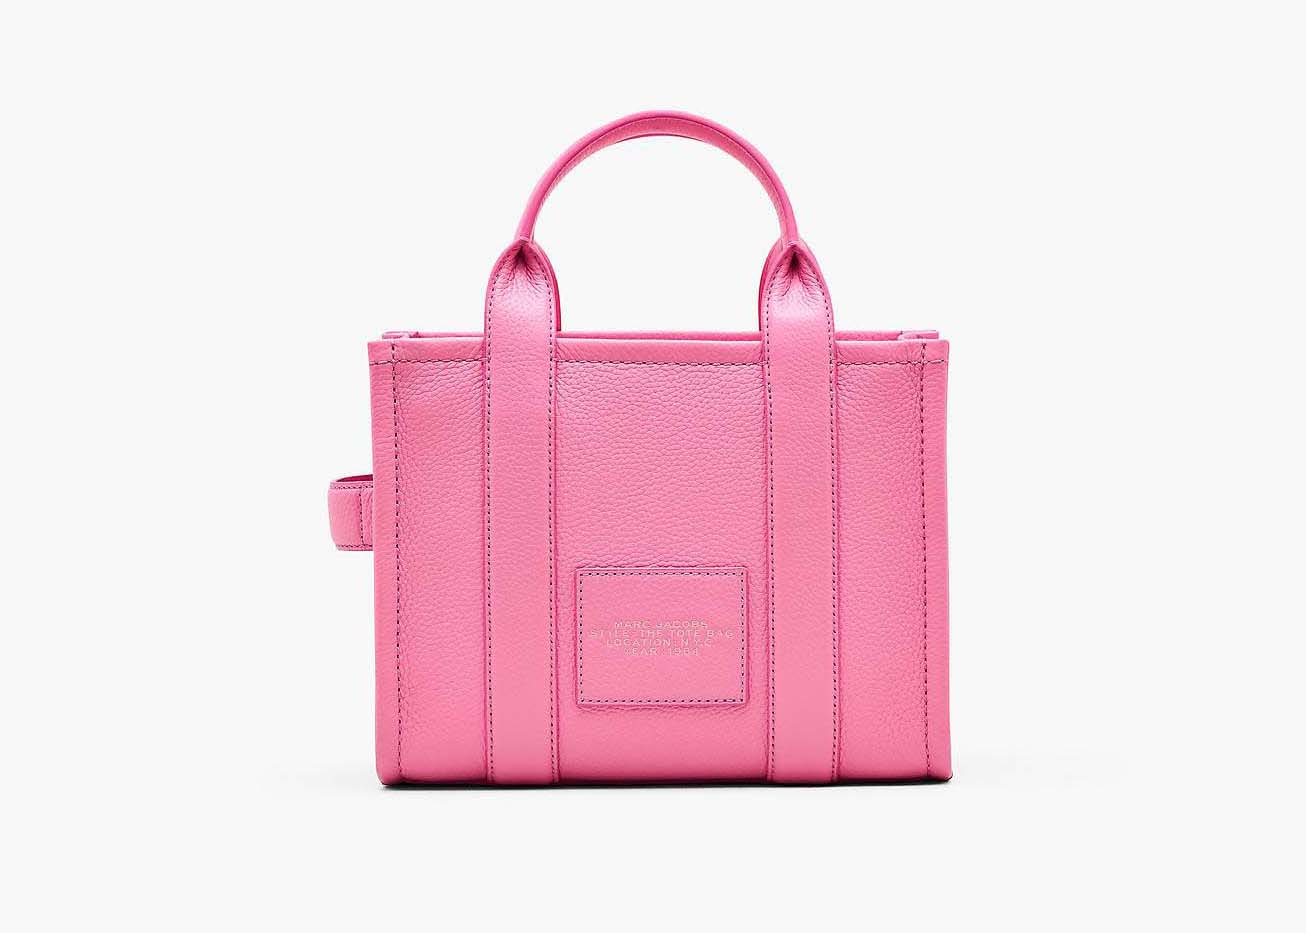 Marc Jacobs The Leather Small Tote Bag Petal Pink in Leather - JP